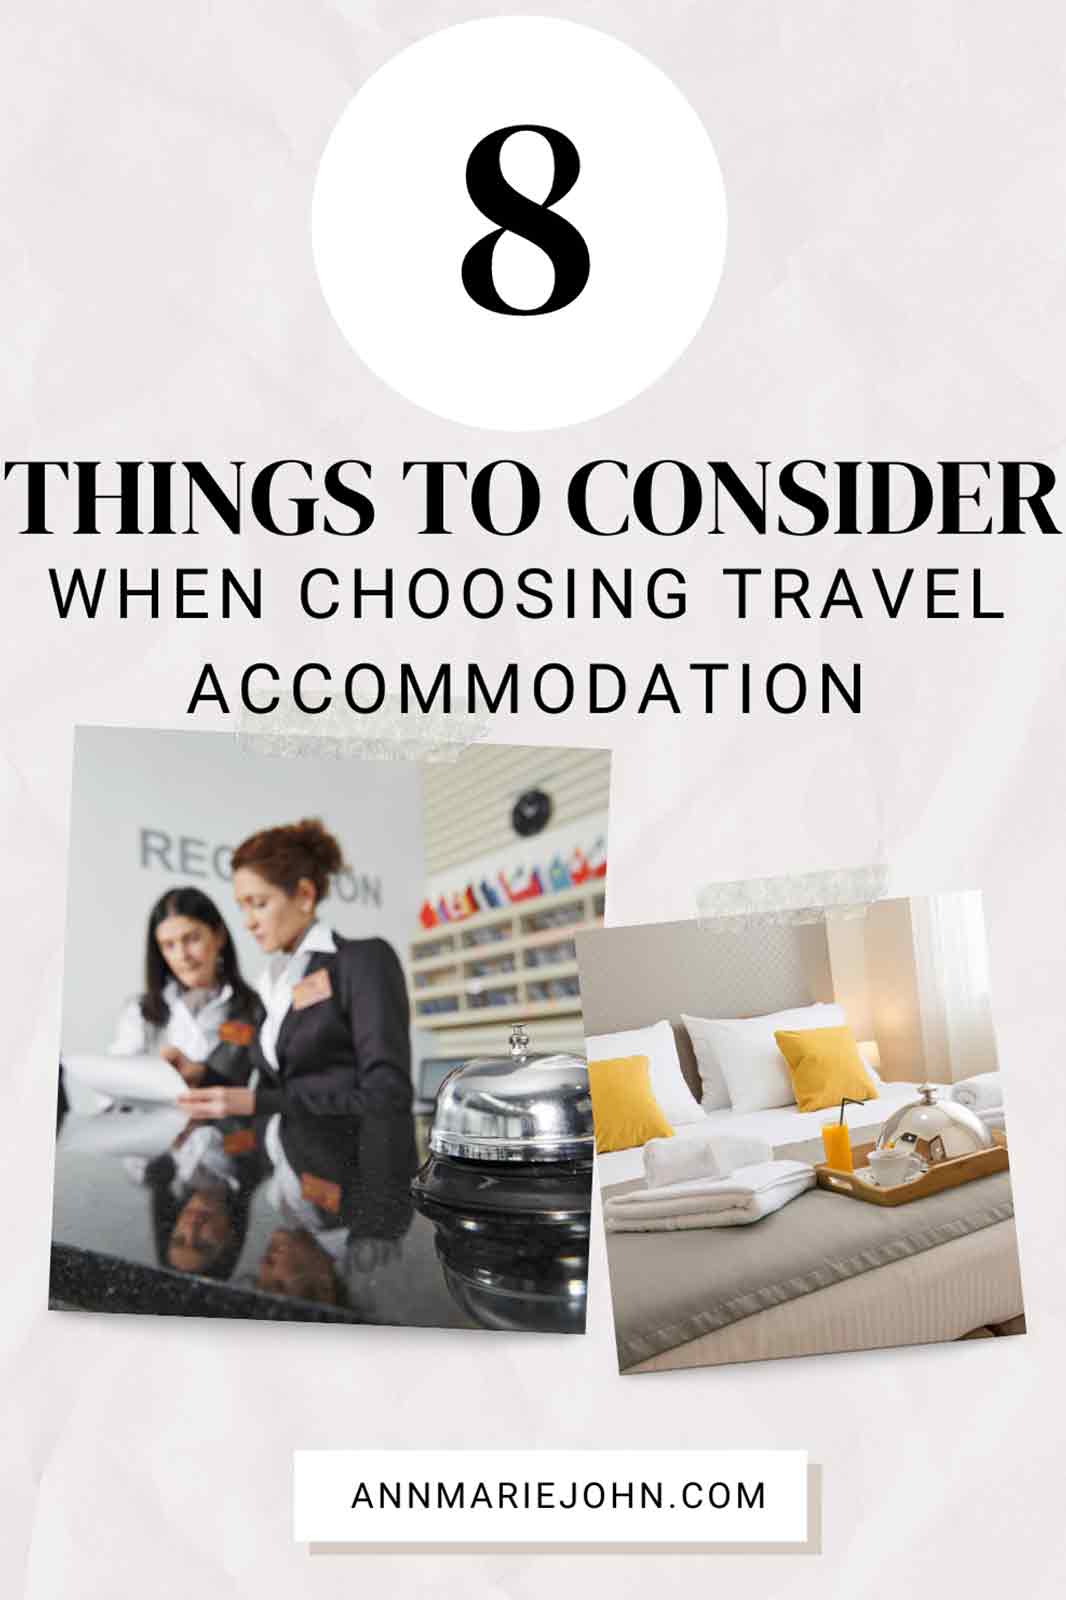 Things to Consider When Choosing Travel Accommodation